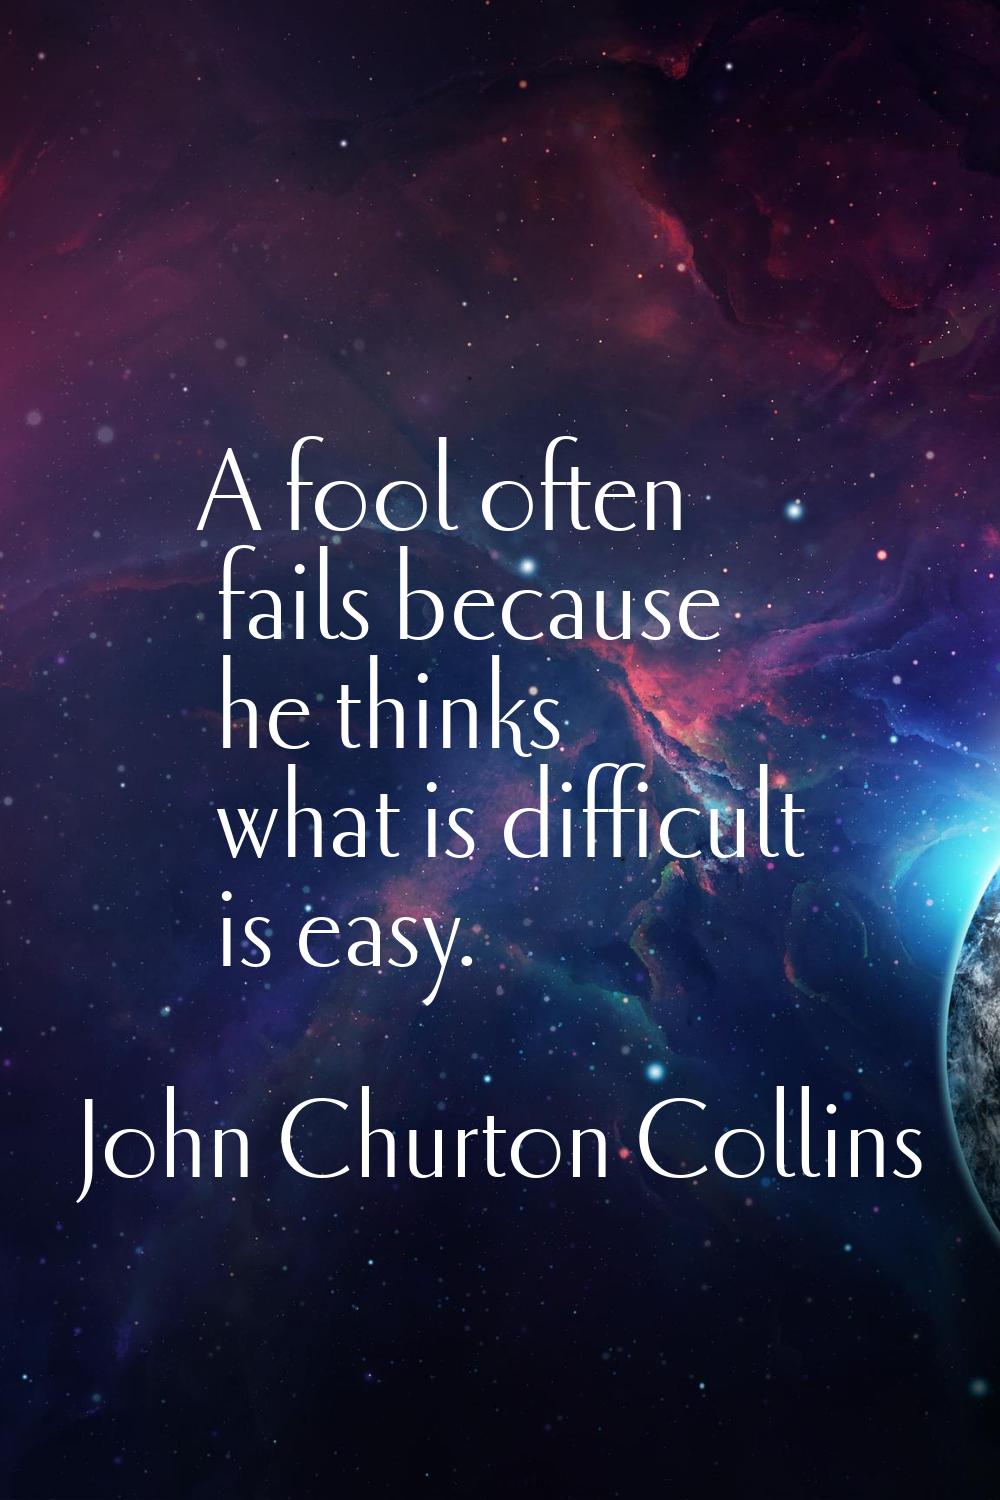 A fool often fails because he thinks what is difficult is easy.